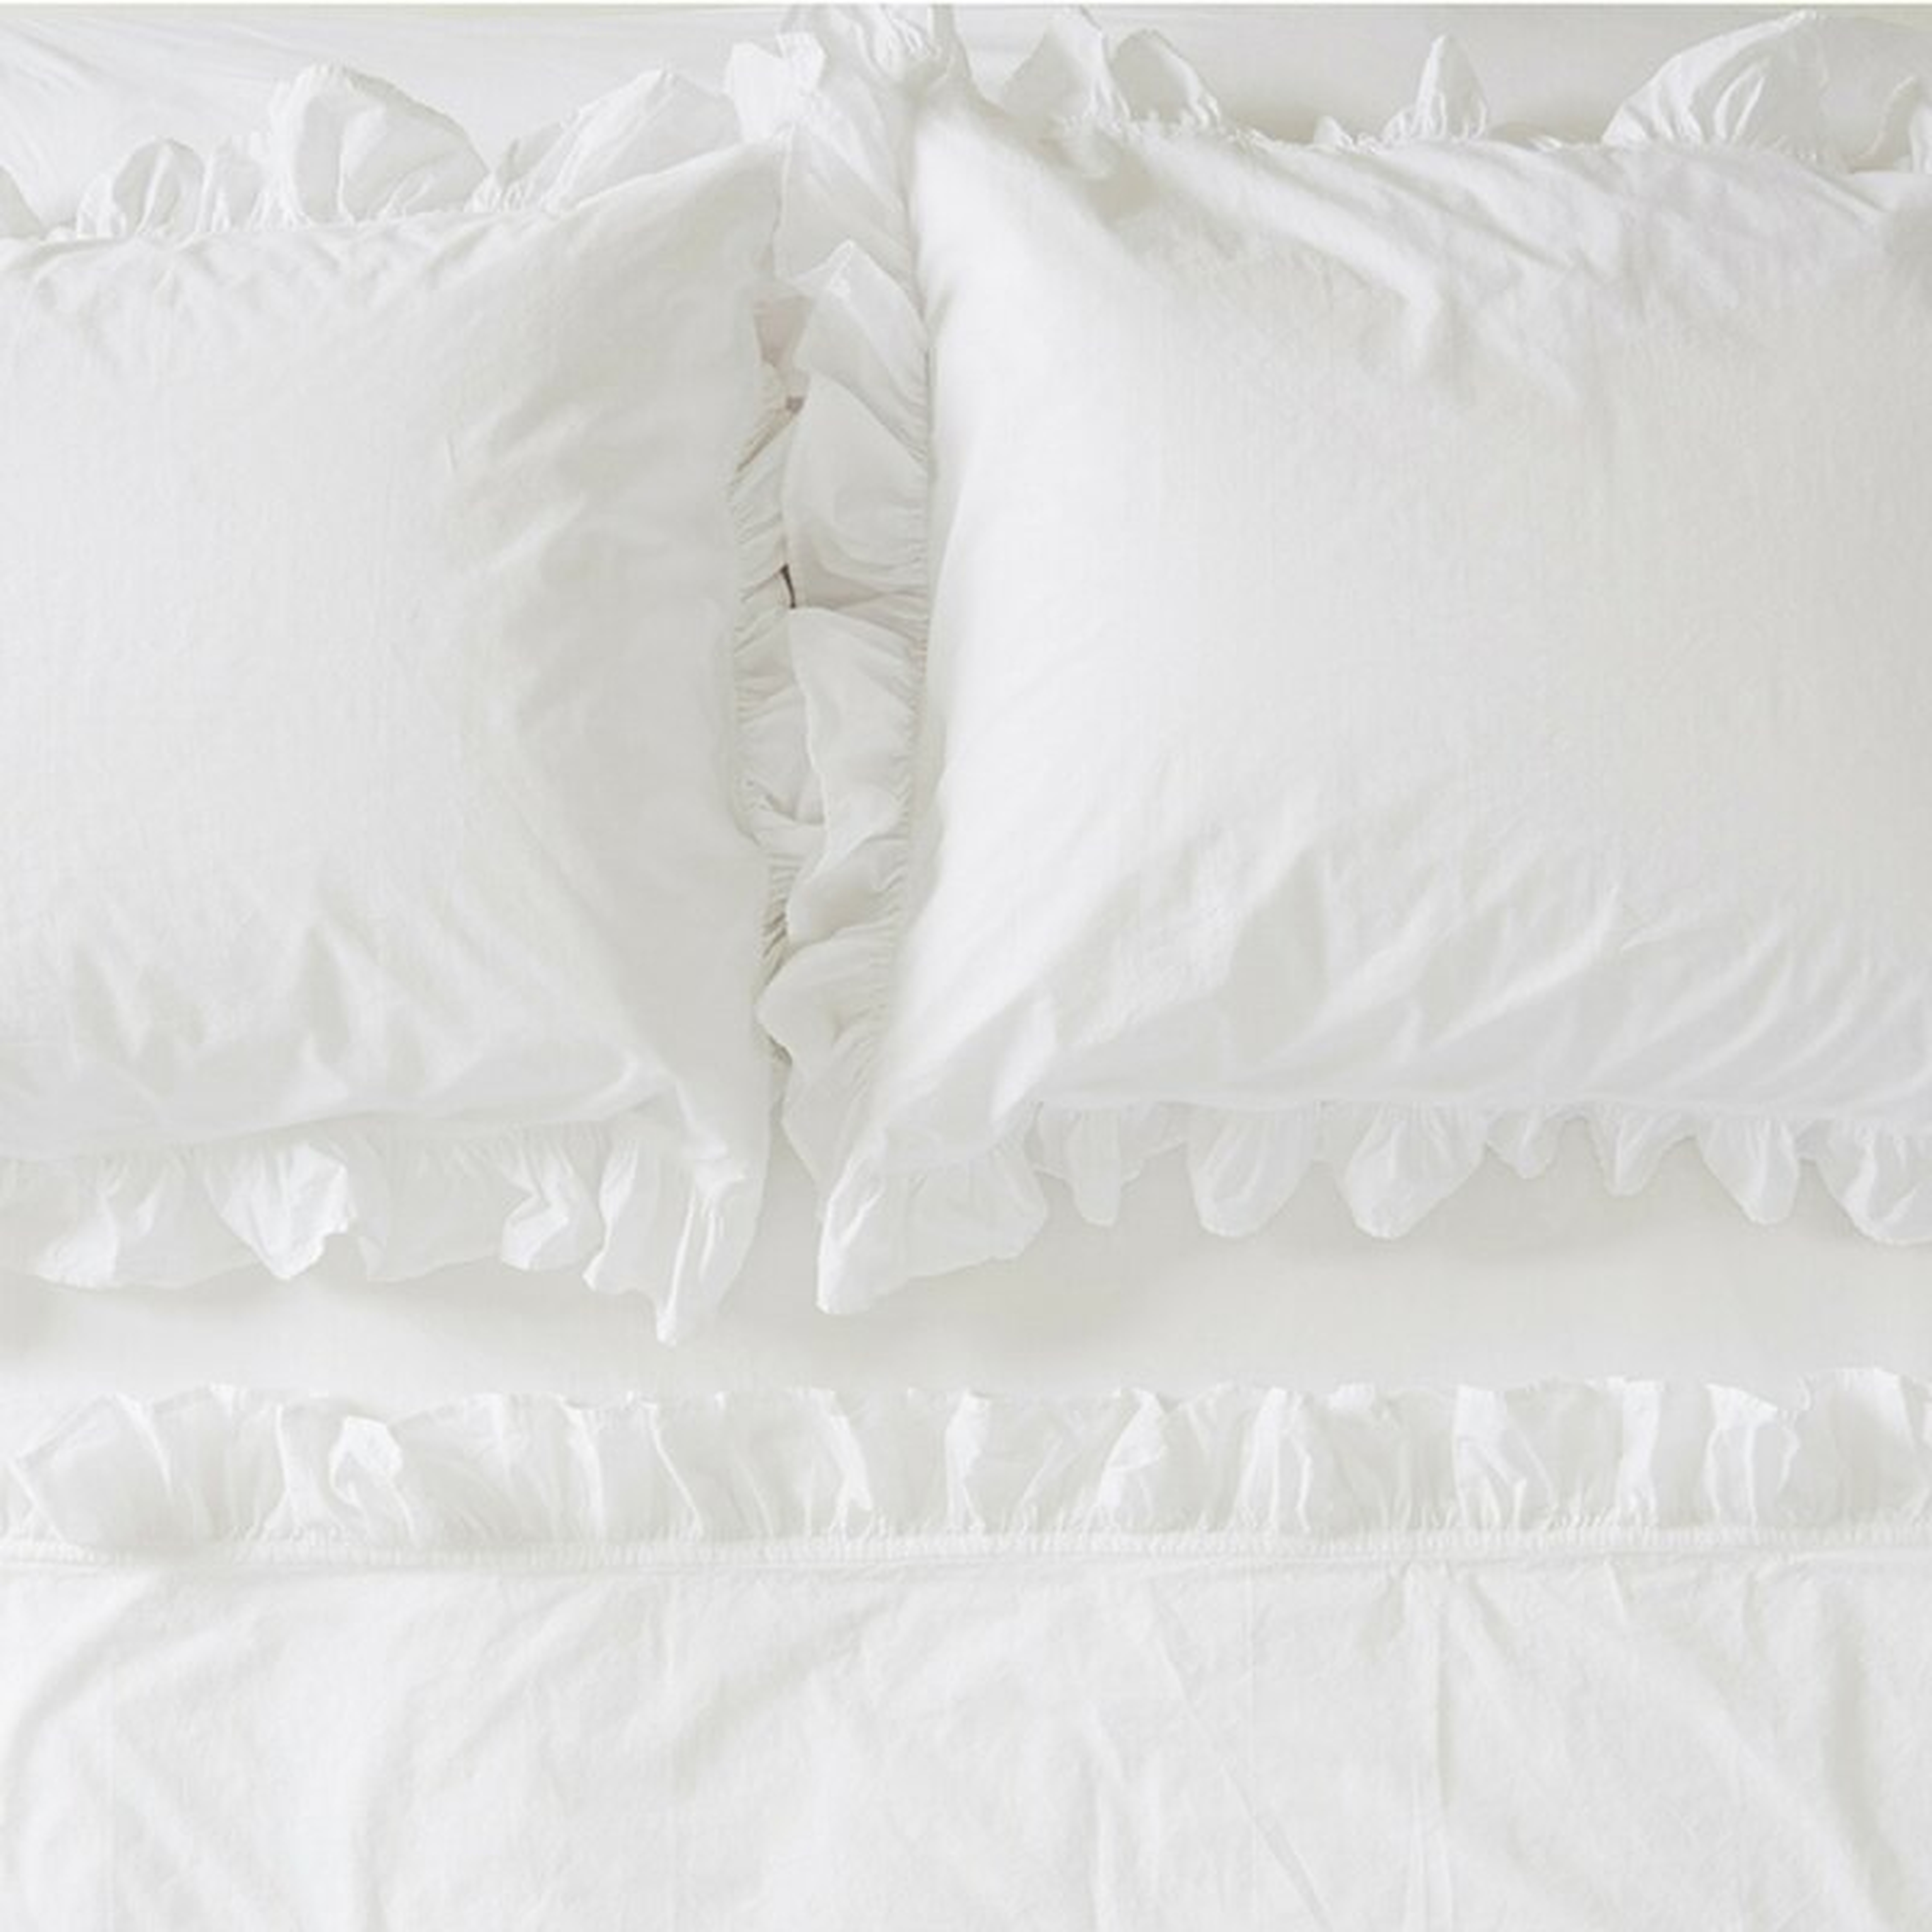 Rachel Ashwell Lilliput Ruffle 275 Thread Count Solid 100% Cotton Flat Sheet Size: Queen, Color: White - Perigold